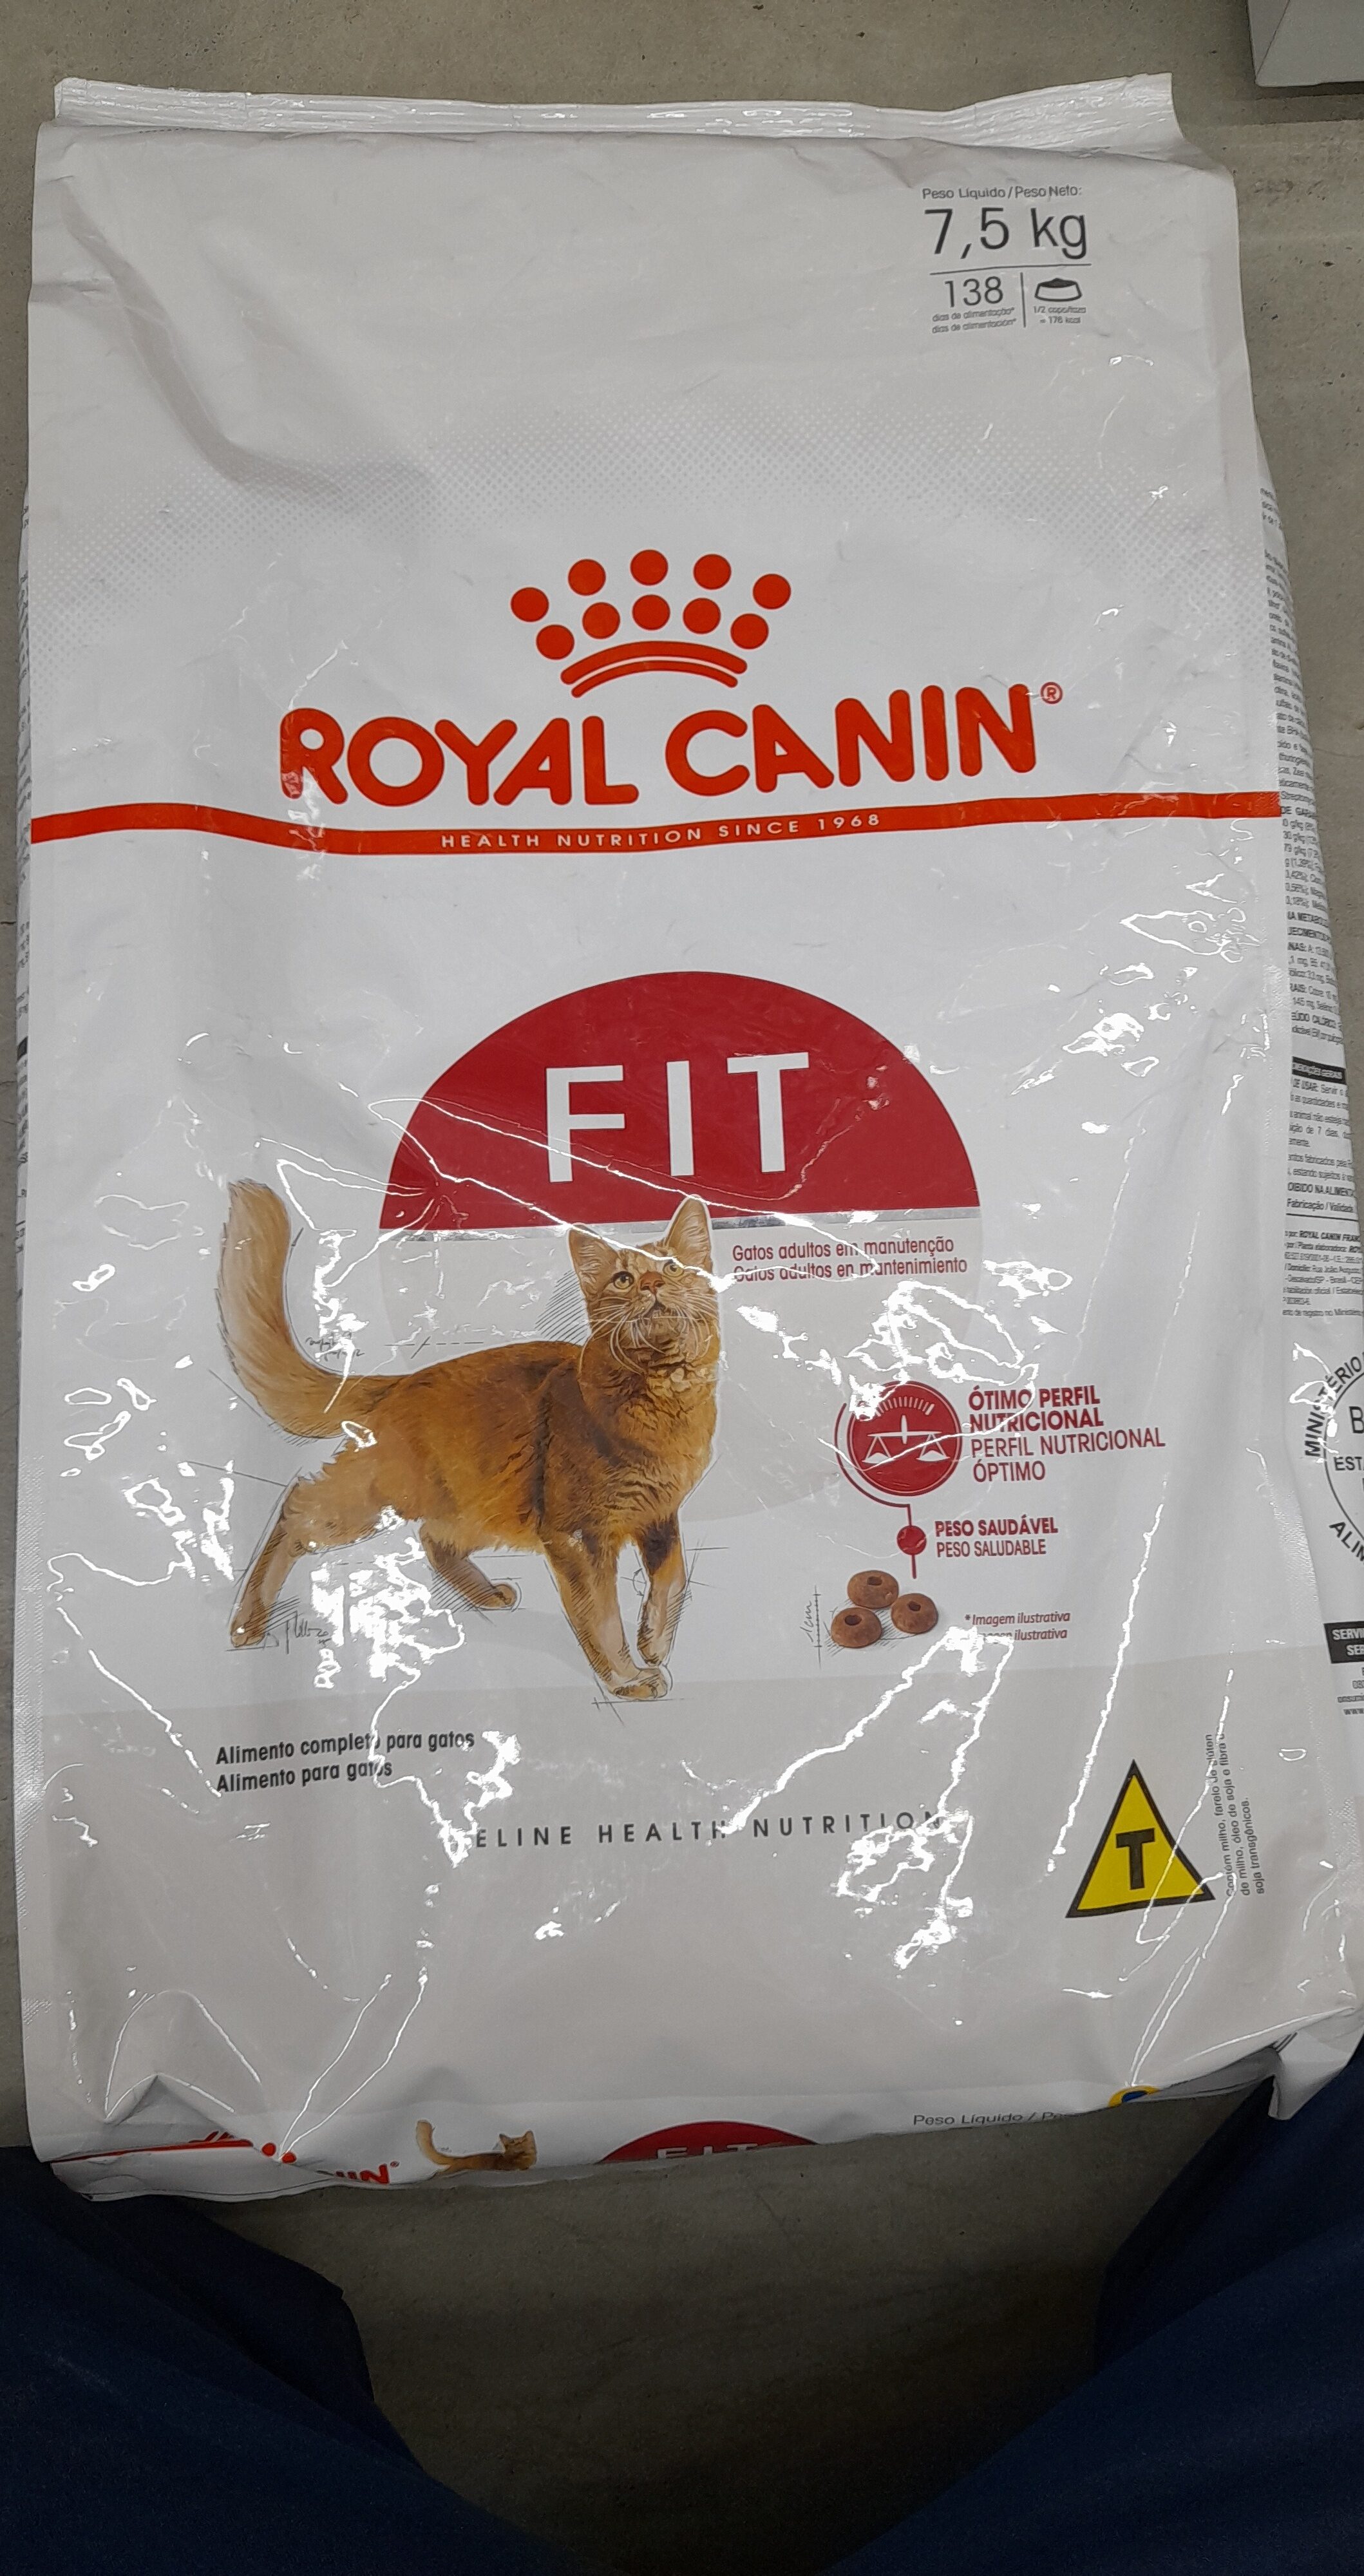 Royal canin gatos fit - Product - pt